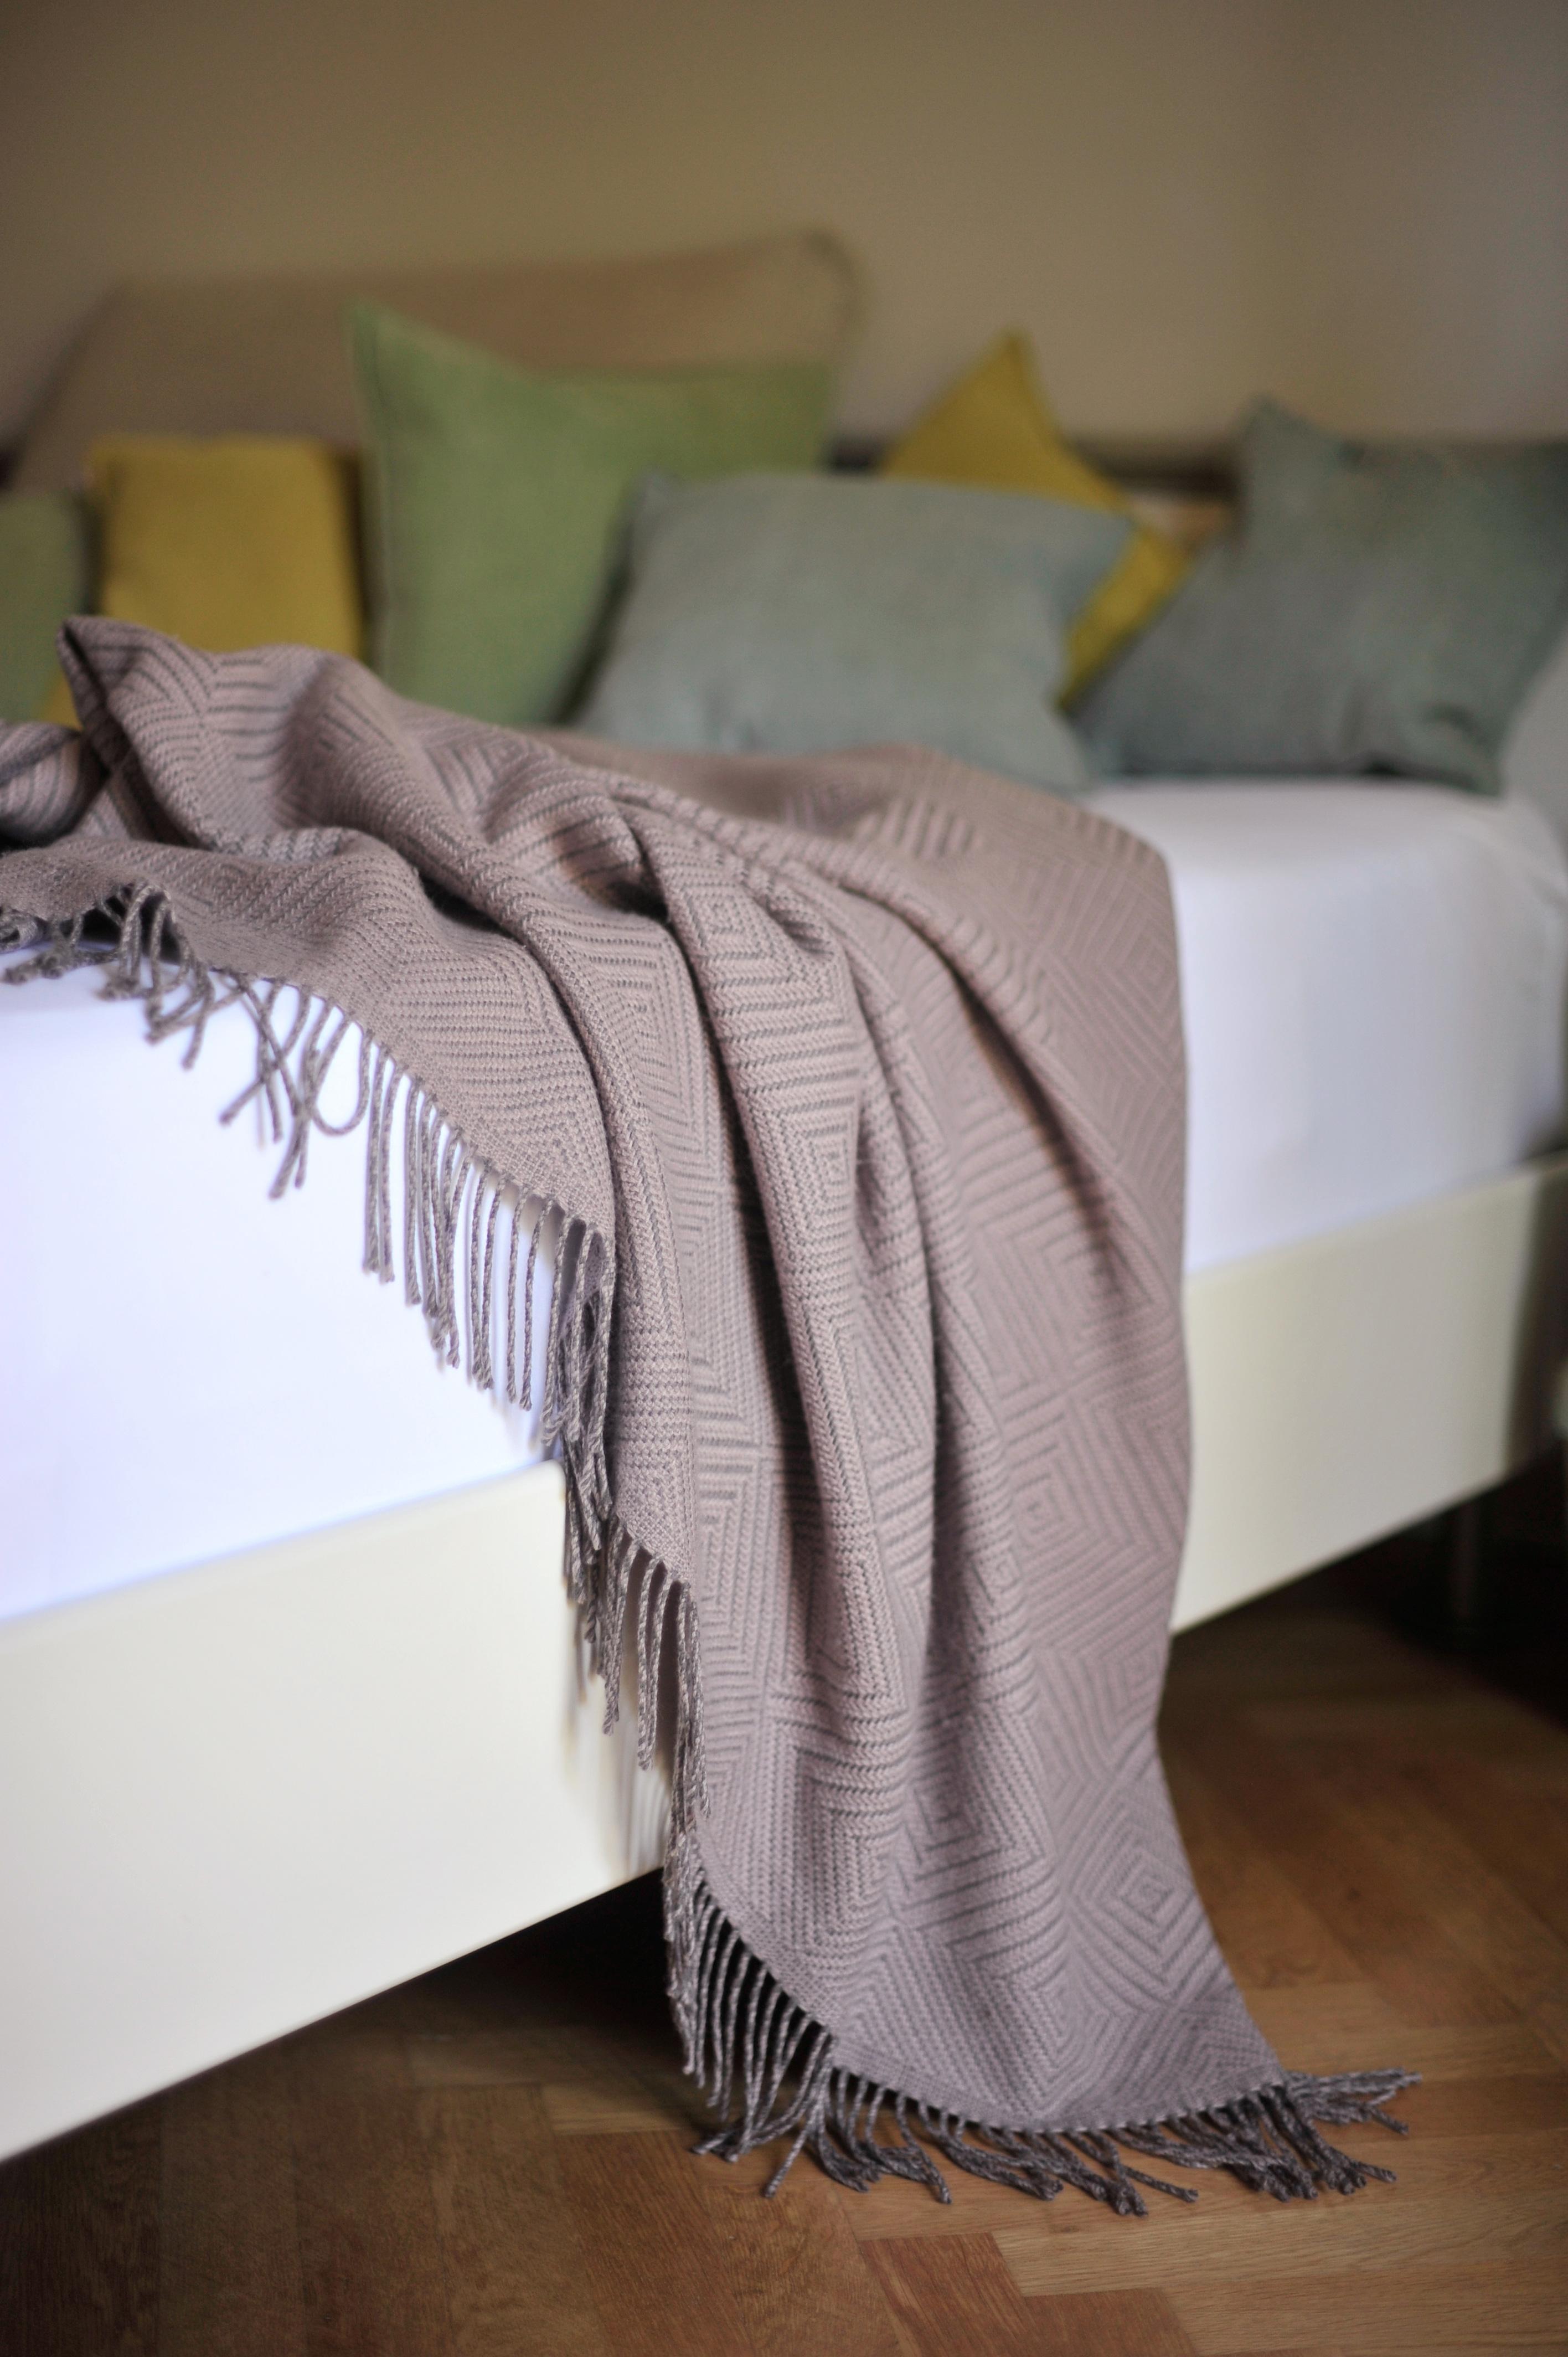 Designed in Berlin by Catharina Mende, woven of 100% extra fine merino in Scotland: This exquisite bed throw in color mauve, woven in Scotland from finest extra fine merino, is a piece of beauty and elegance for every bedroom - day and night, winter